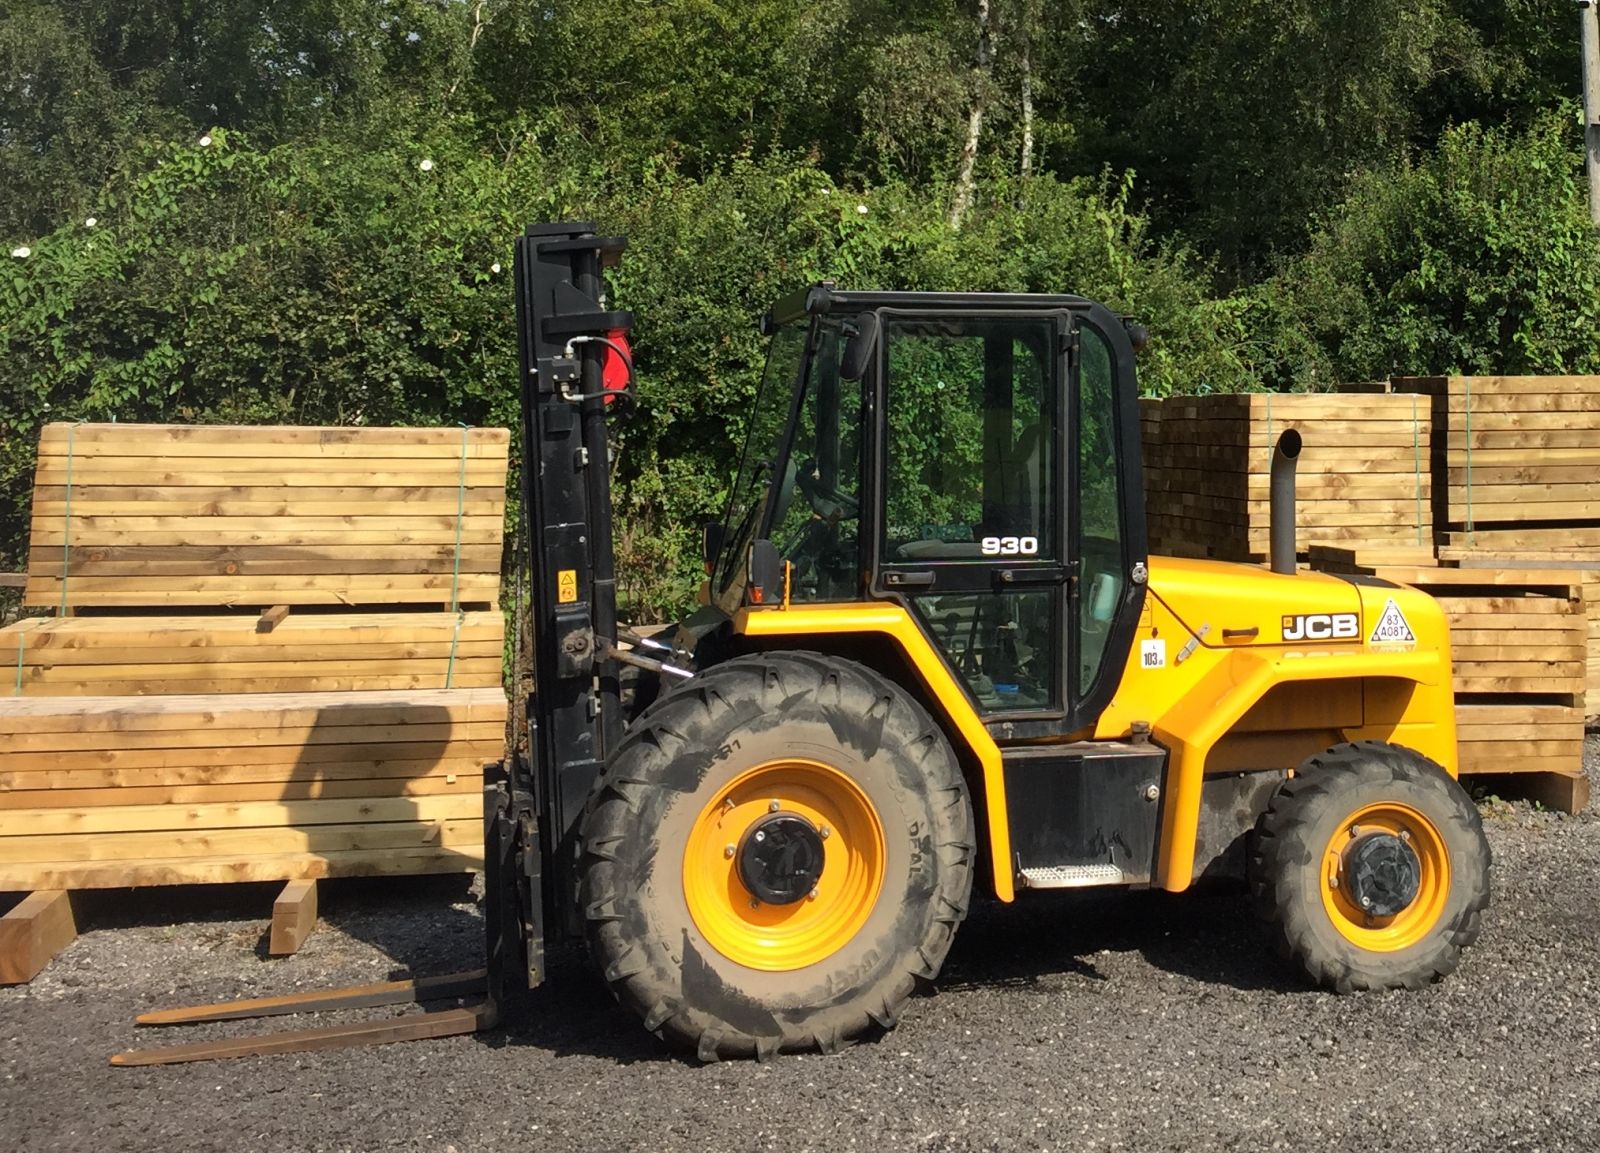 Our yellow forklift in our railway sleeper yard. Railwaysleepers.com